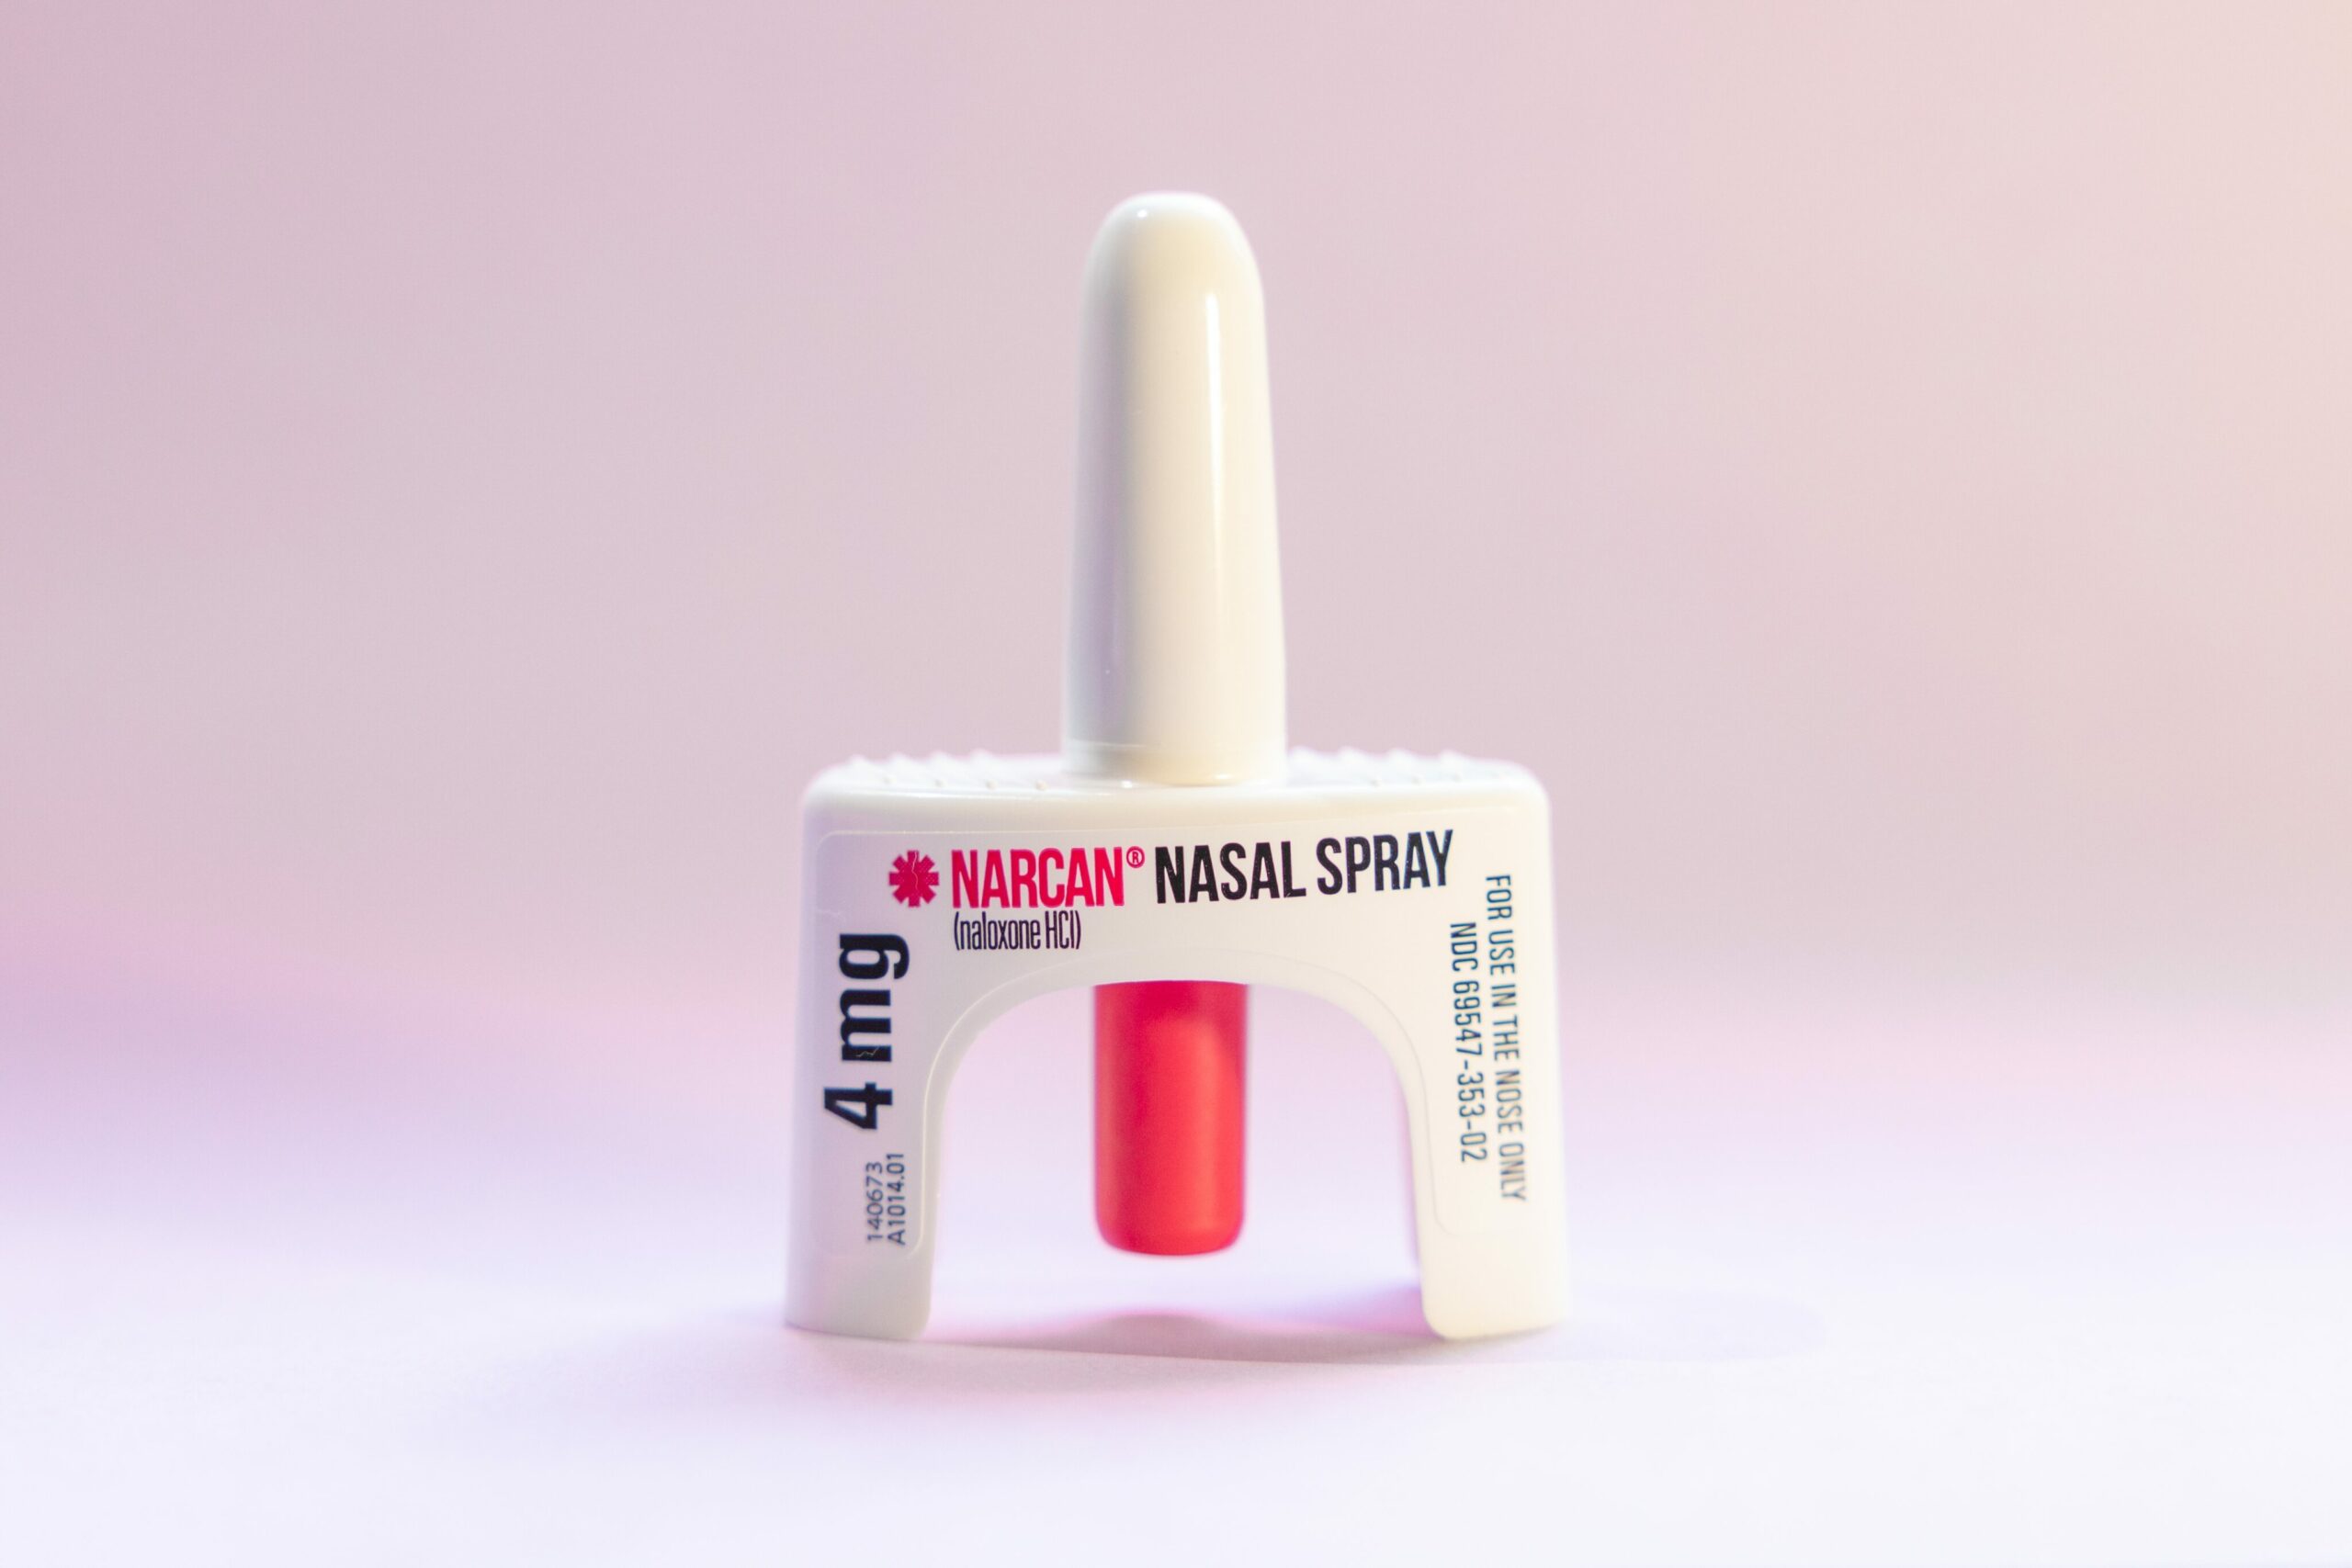 Minnesota Lawmakers Push To Make Narcan Available in Schools